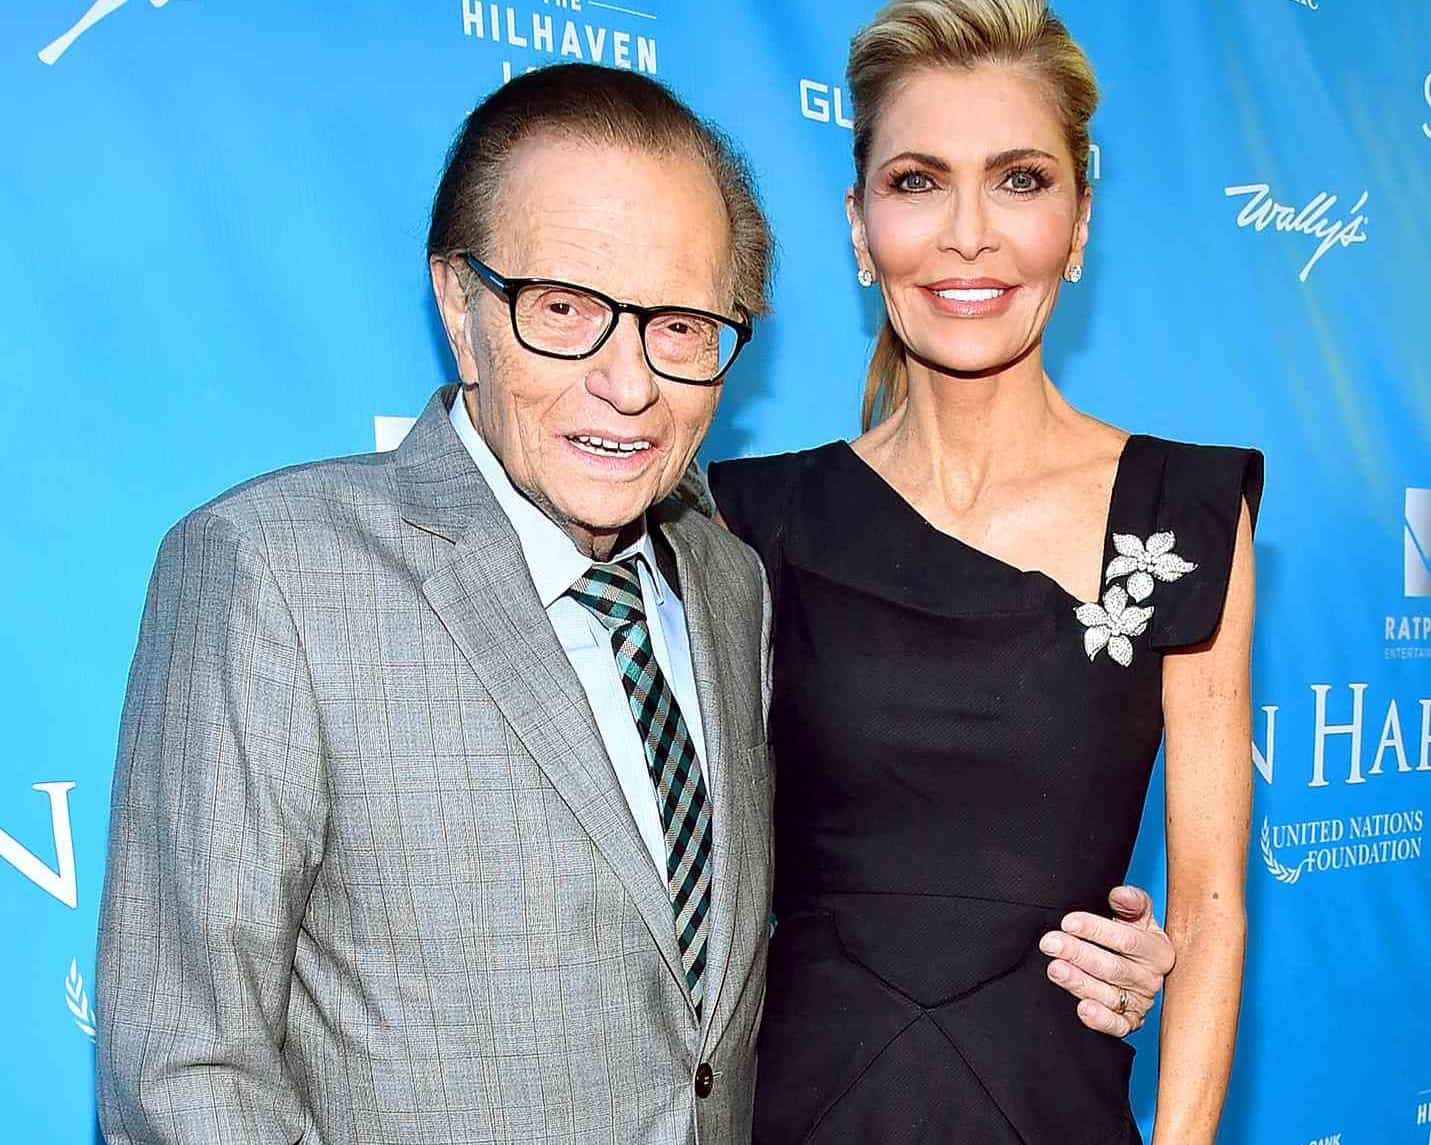 In 1997, Larry King married his seventh wife, Shawn Southwick